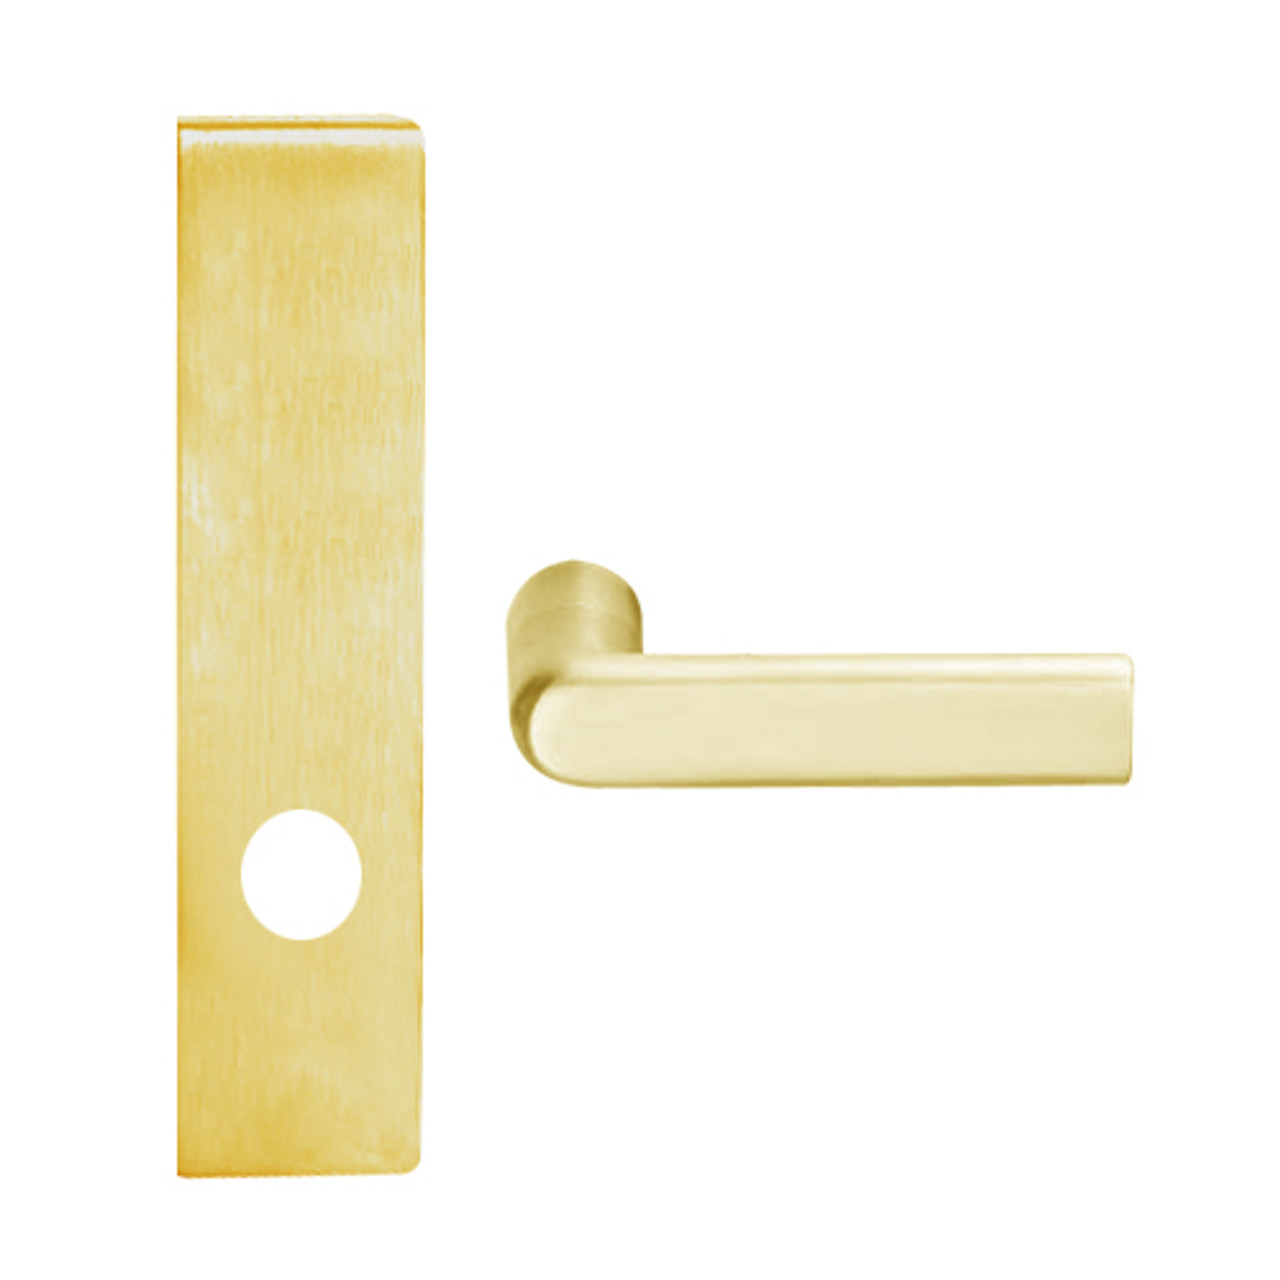 L9440-01L-605 Schlage L Series Privacy with Deadbolt Commercial Mortise Lock with 01 Cast Lever Design in Bright Brass